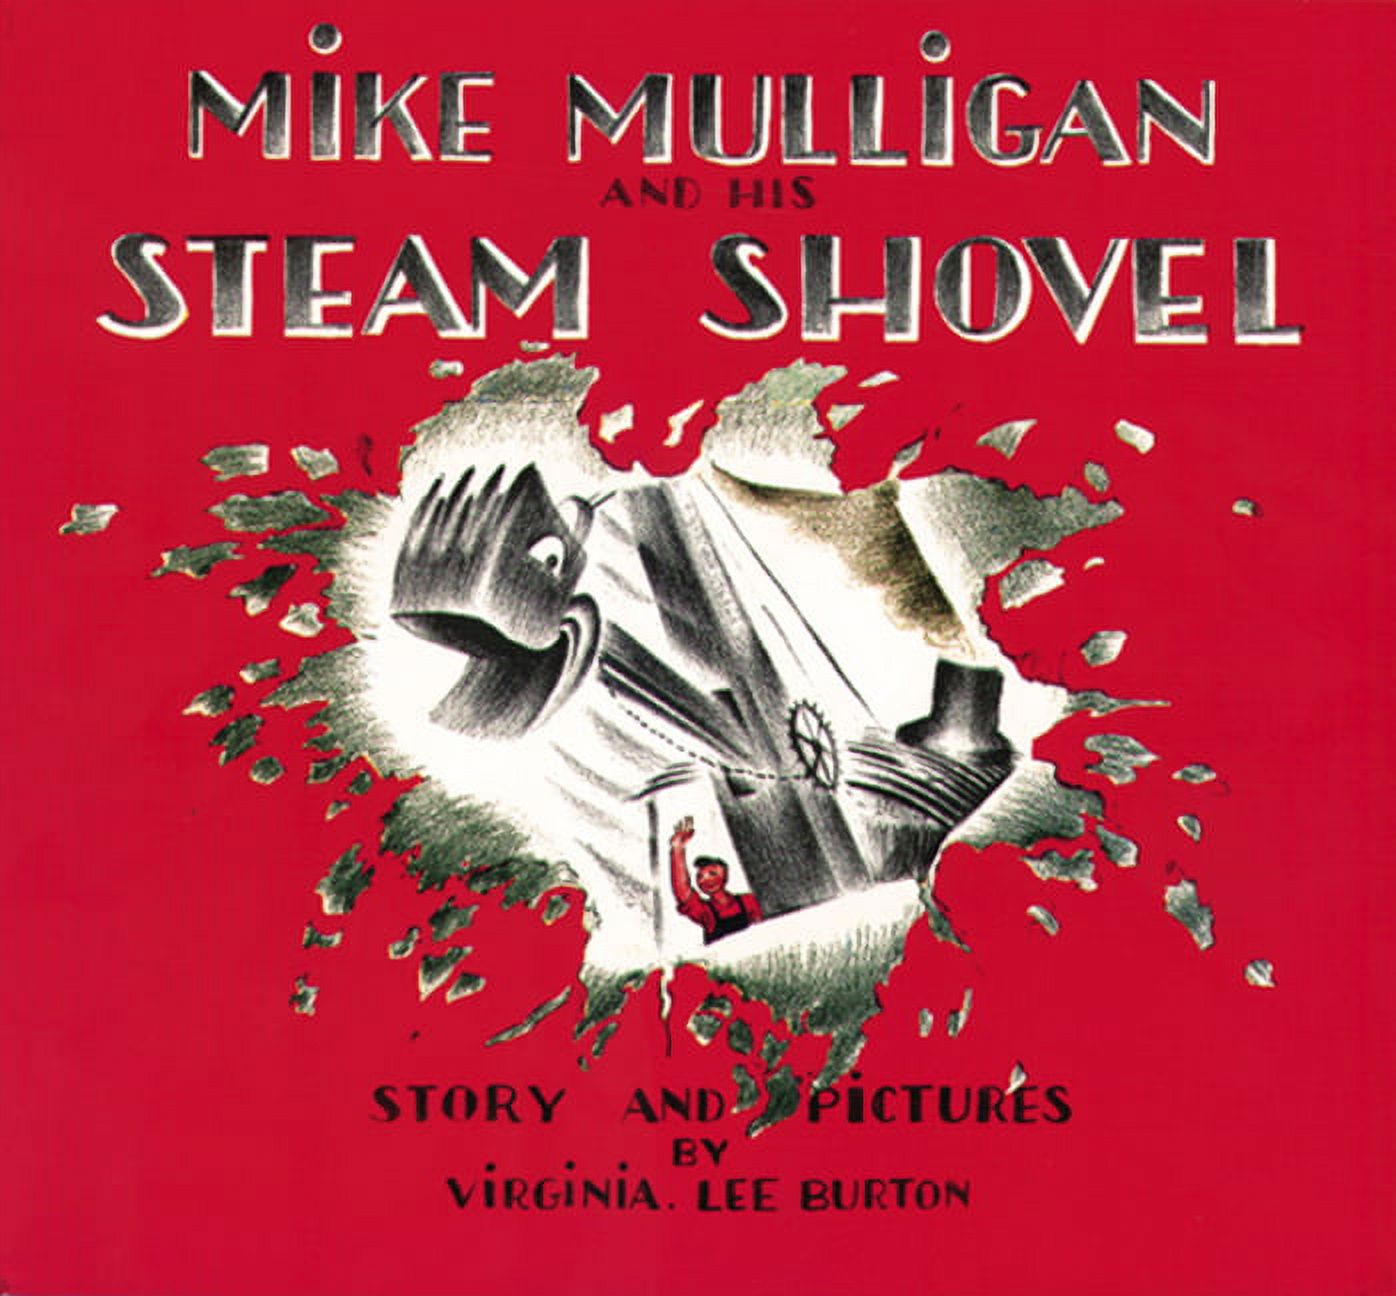 Mike Mulligan and His Steam Shovel (Anniversary) (Paperback) - image 1 of 2